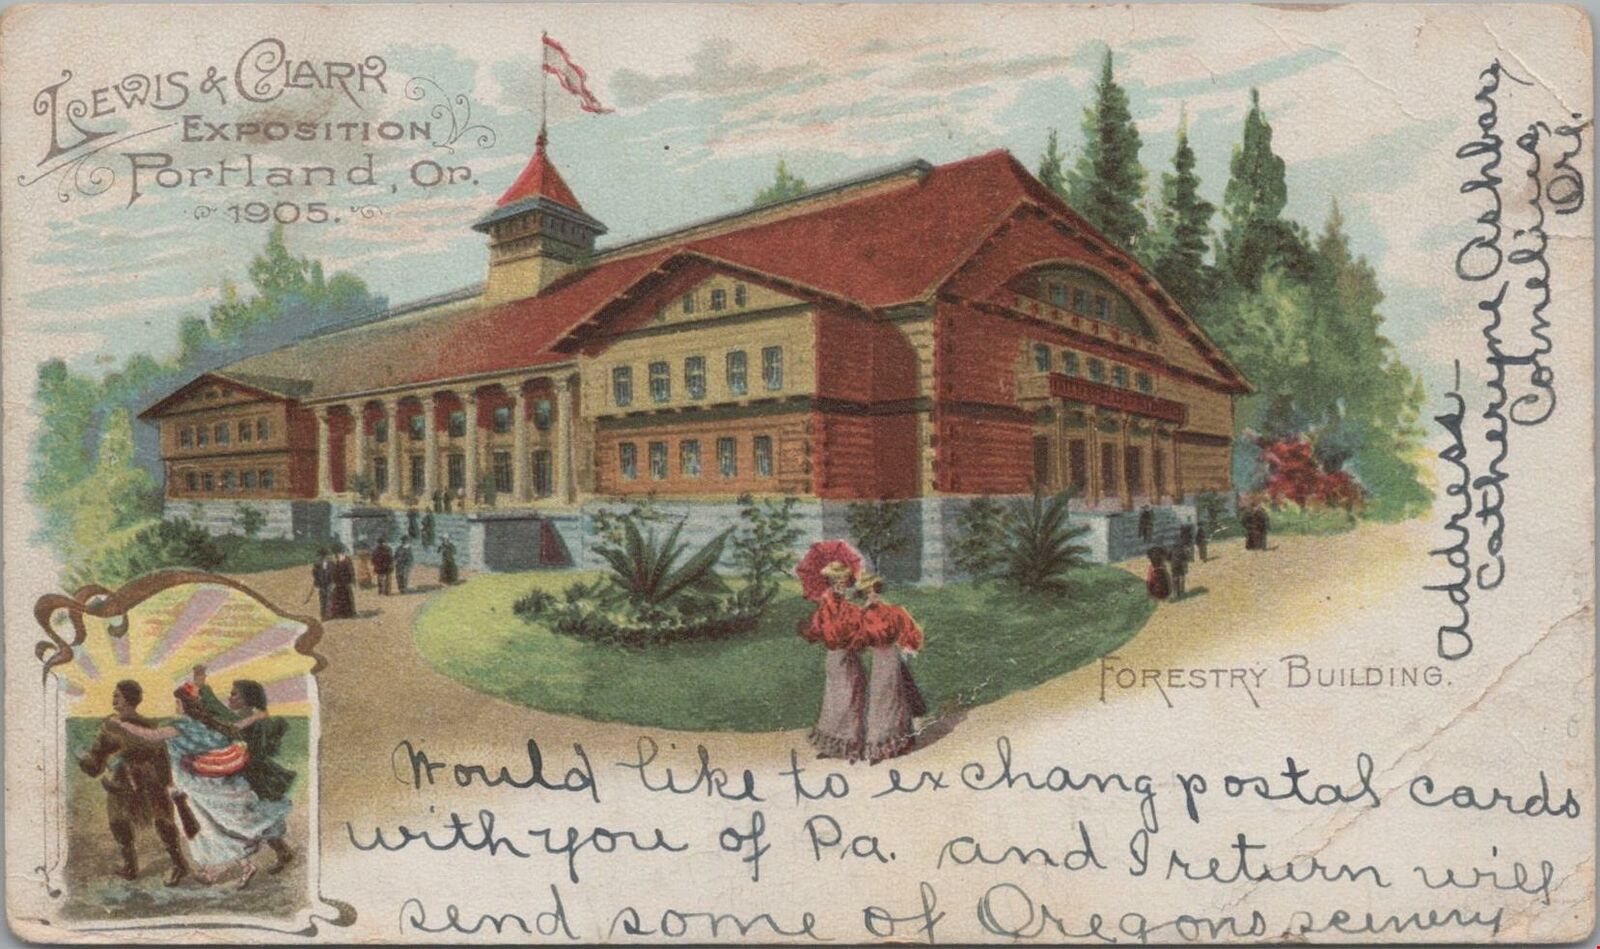 Postcard Lewis & Clark Expo Portland OR 1905 Forestry Building 1908